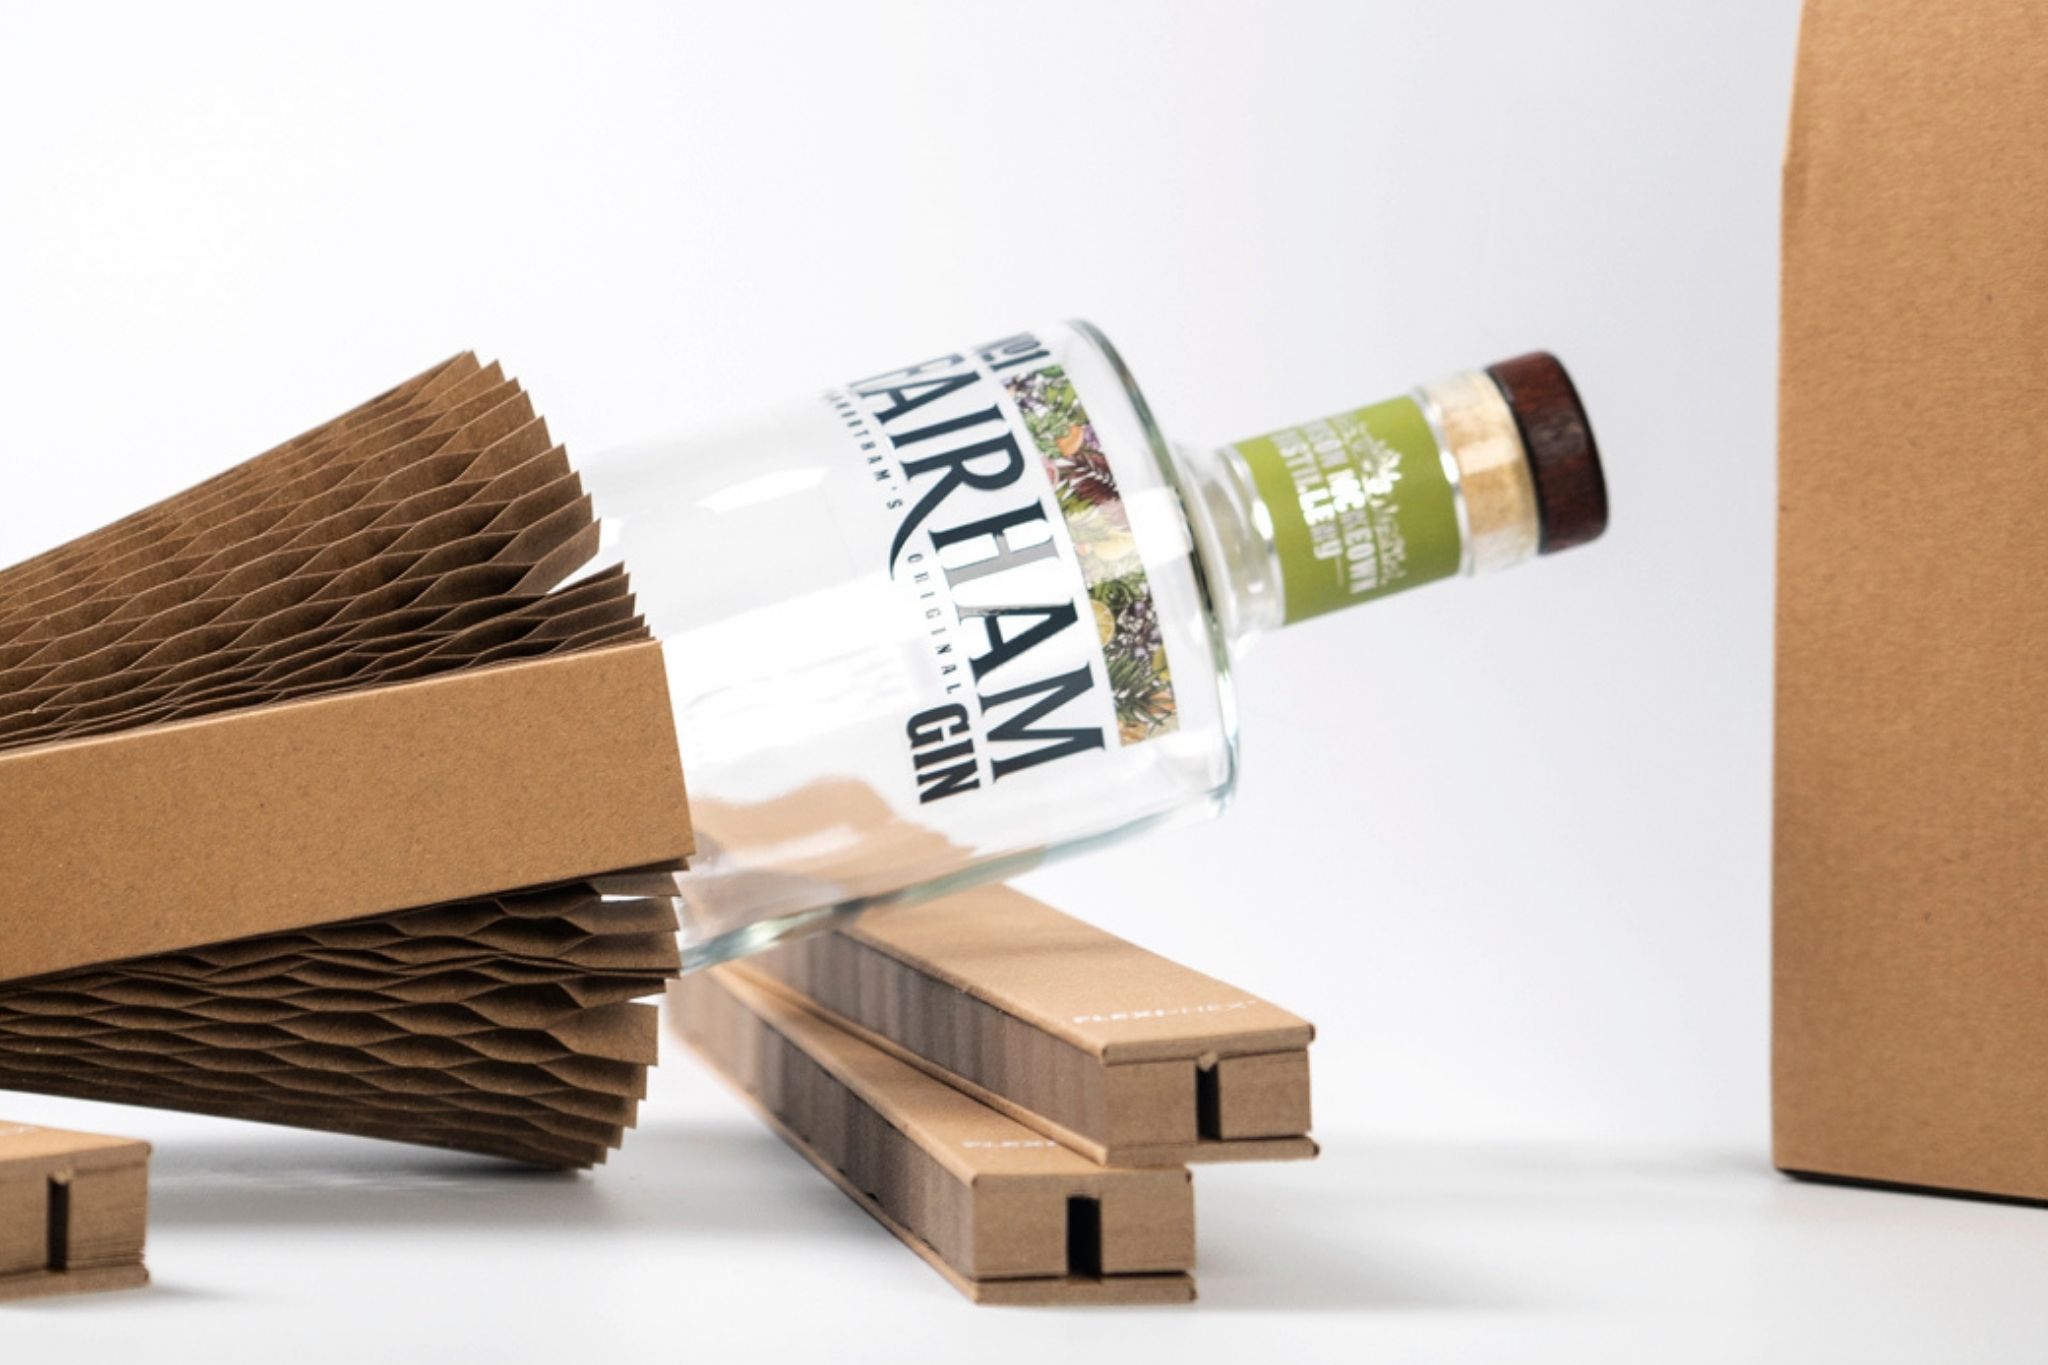 100% plastic free packaging using within craft gin distilling